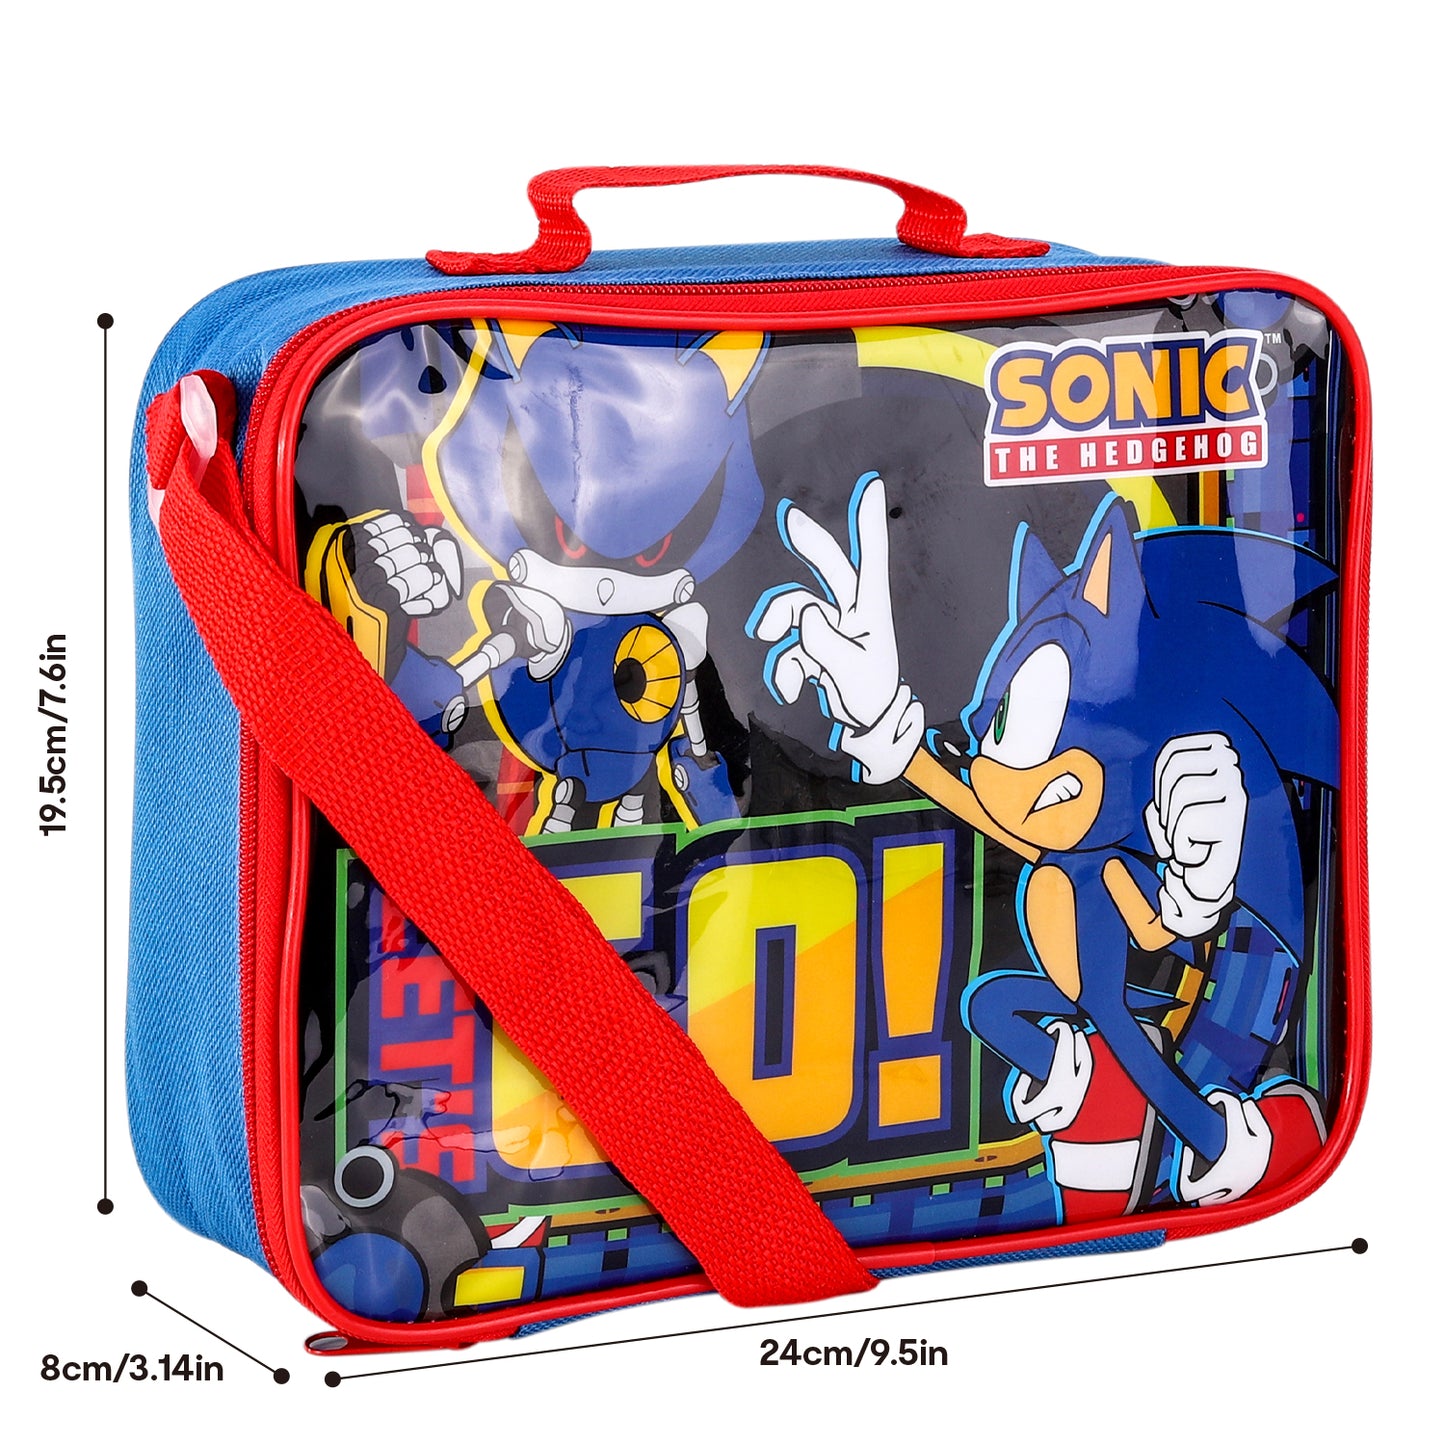 Sonic the Hedgehog Lunch Bag